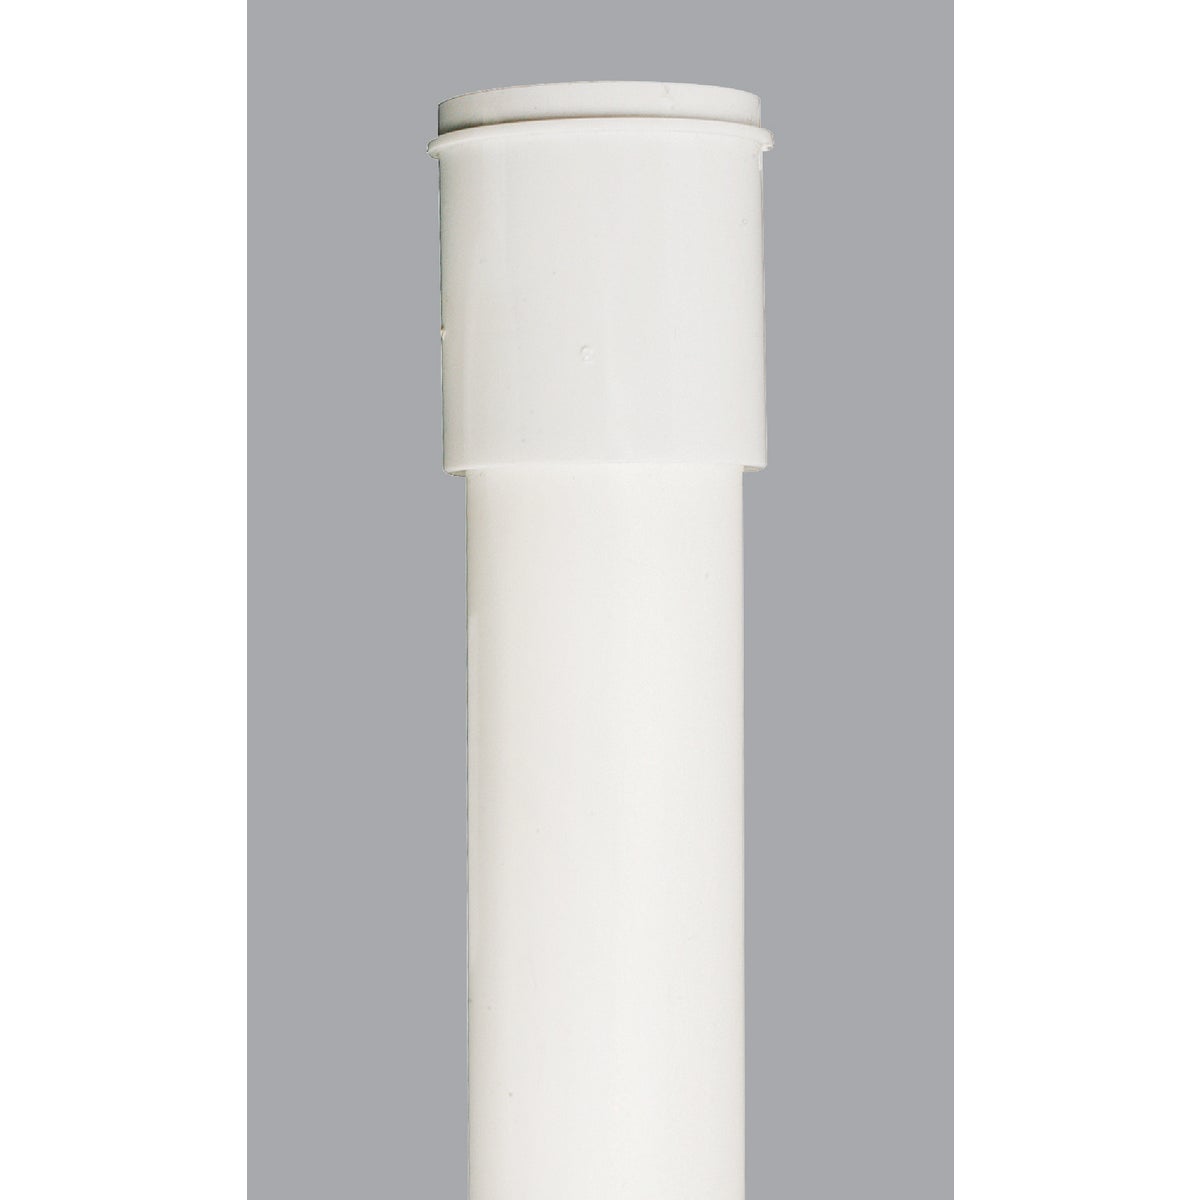 Item 406643, Keeney Polypropylene Extension Tubes allow you to extend the waste 